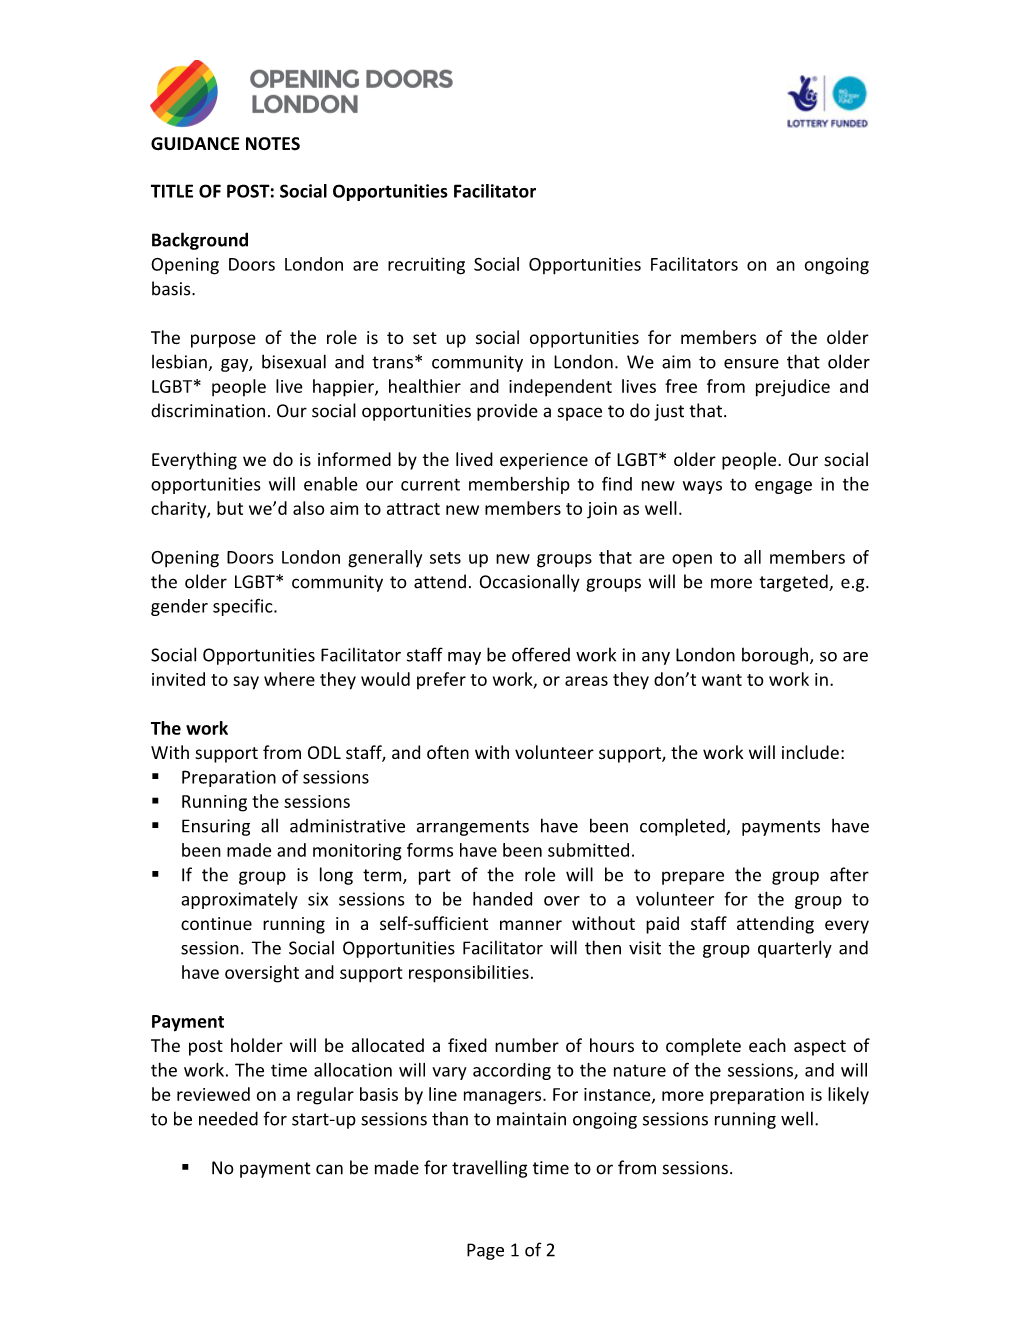 Guidance Notes for Opening Doors Sessional Workers